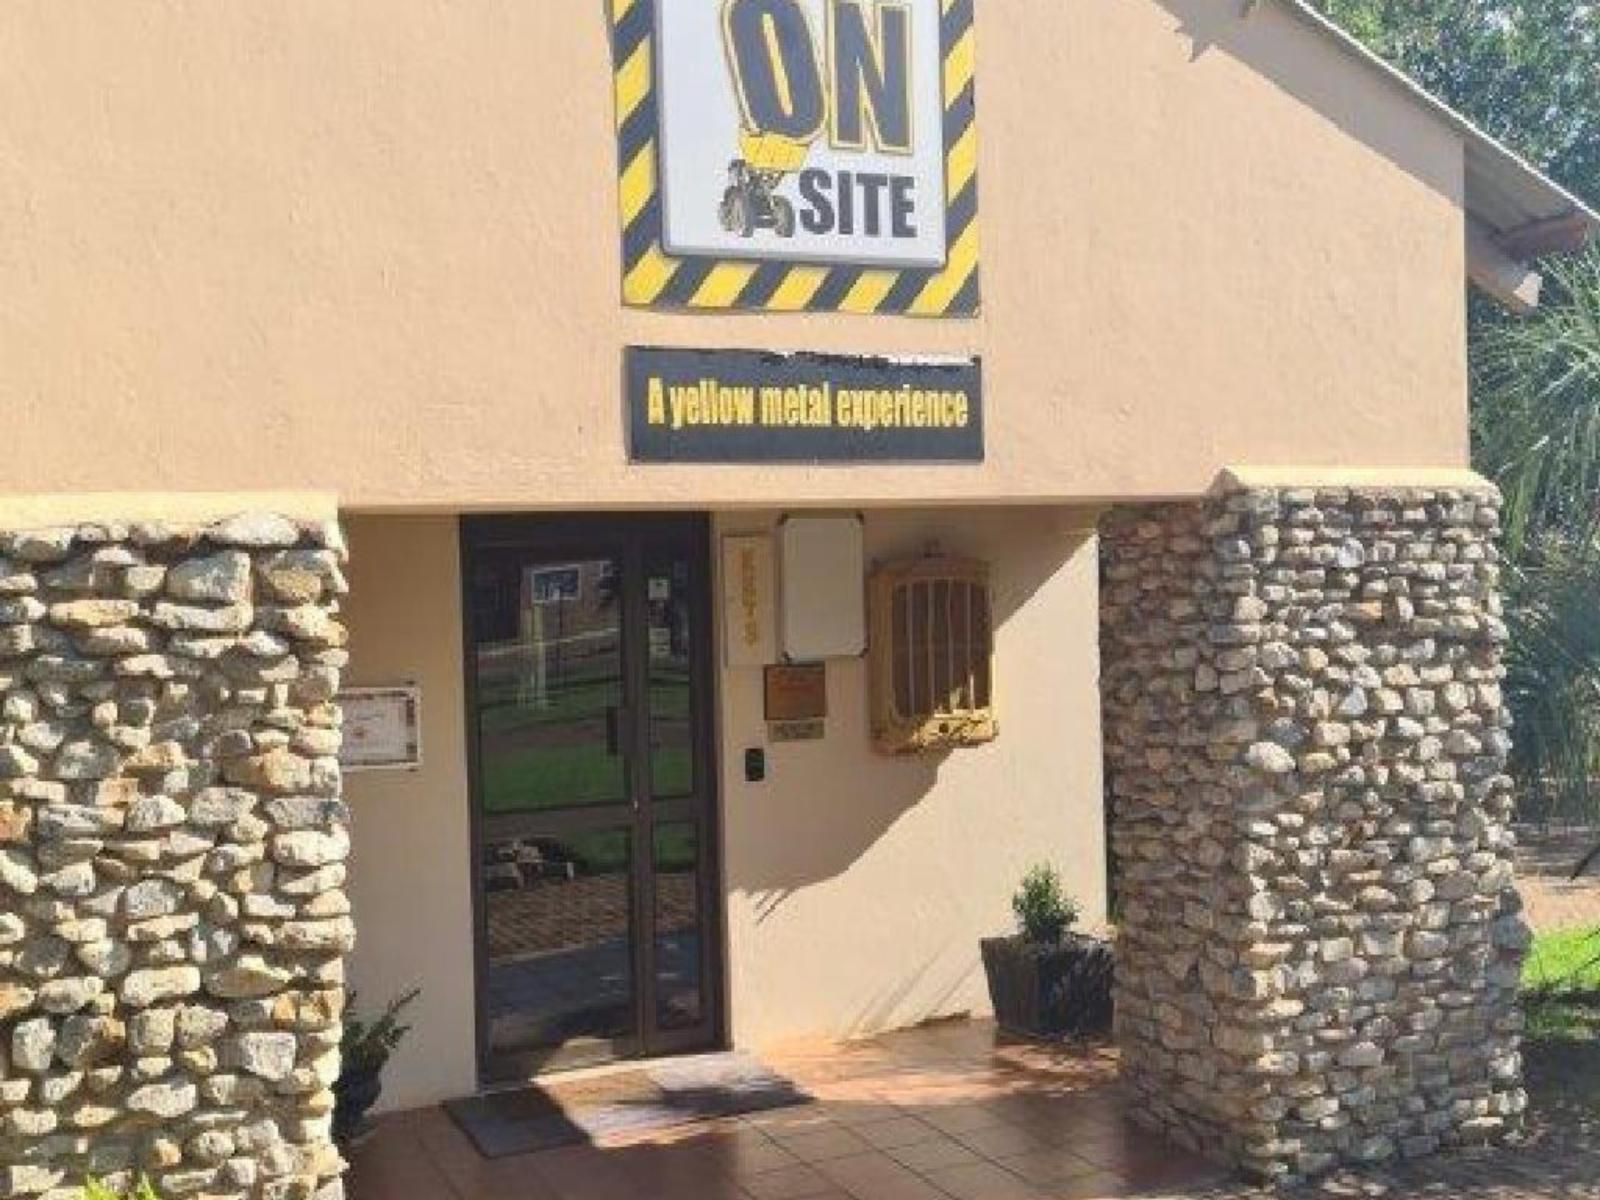 The Venue And Guest Rooms On Site Potchefstroom North West Province South Africa Sign, Text